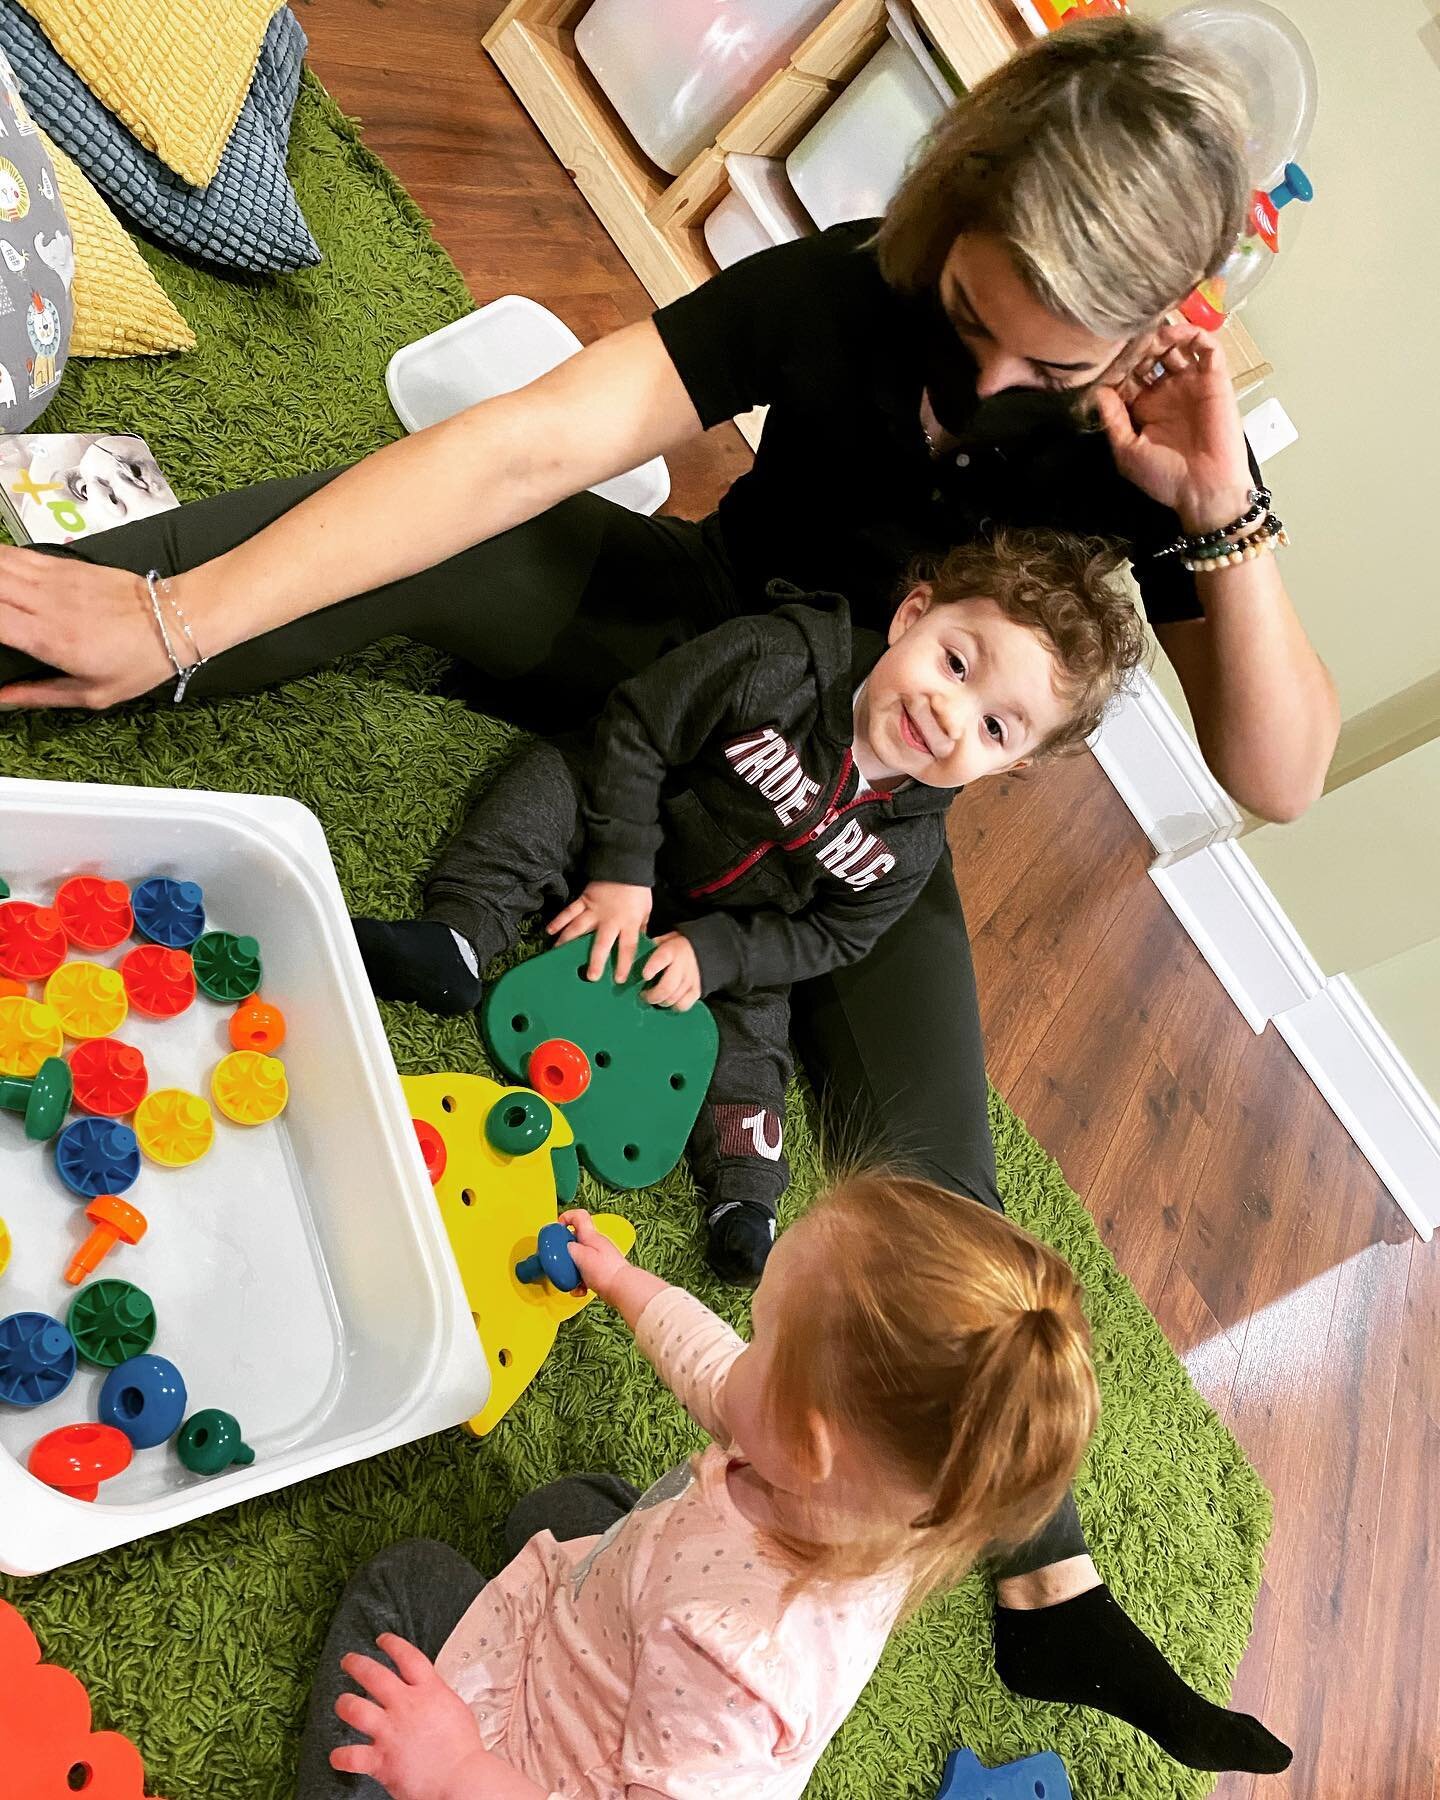 Peg and pegboards are wonderful teaching toys in many ways. With adult support, as the toddler places the pegs he can count them: one, two, three. Add one more to make four; take one away and it is three. The toddler is becoming aware of numerals and